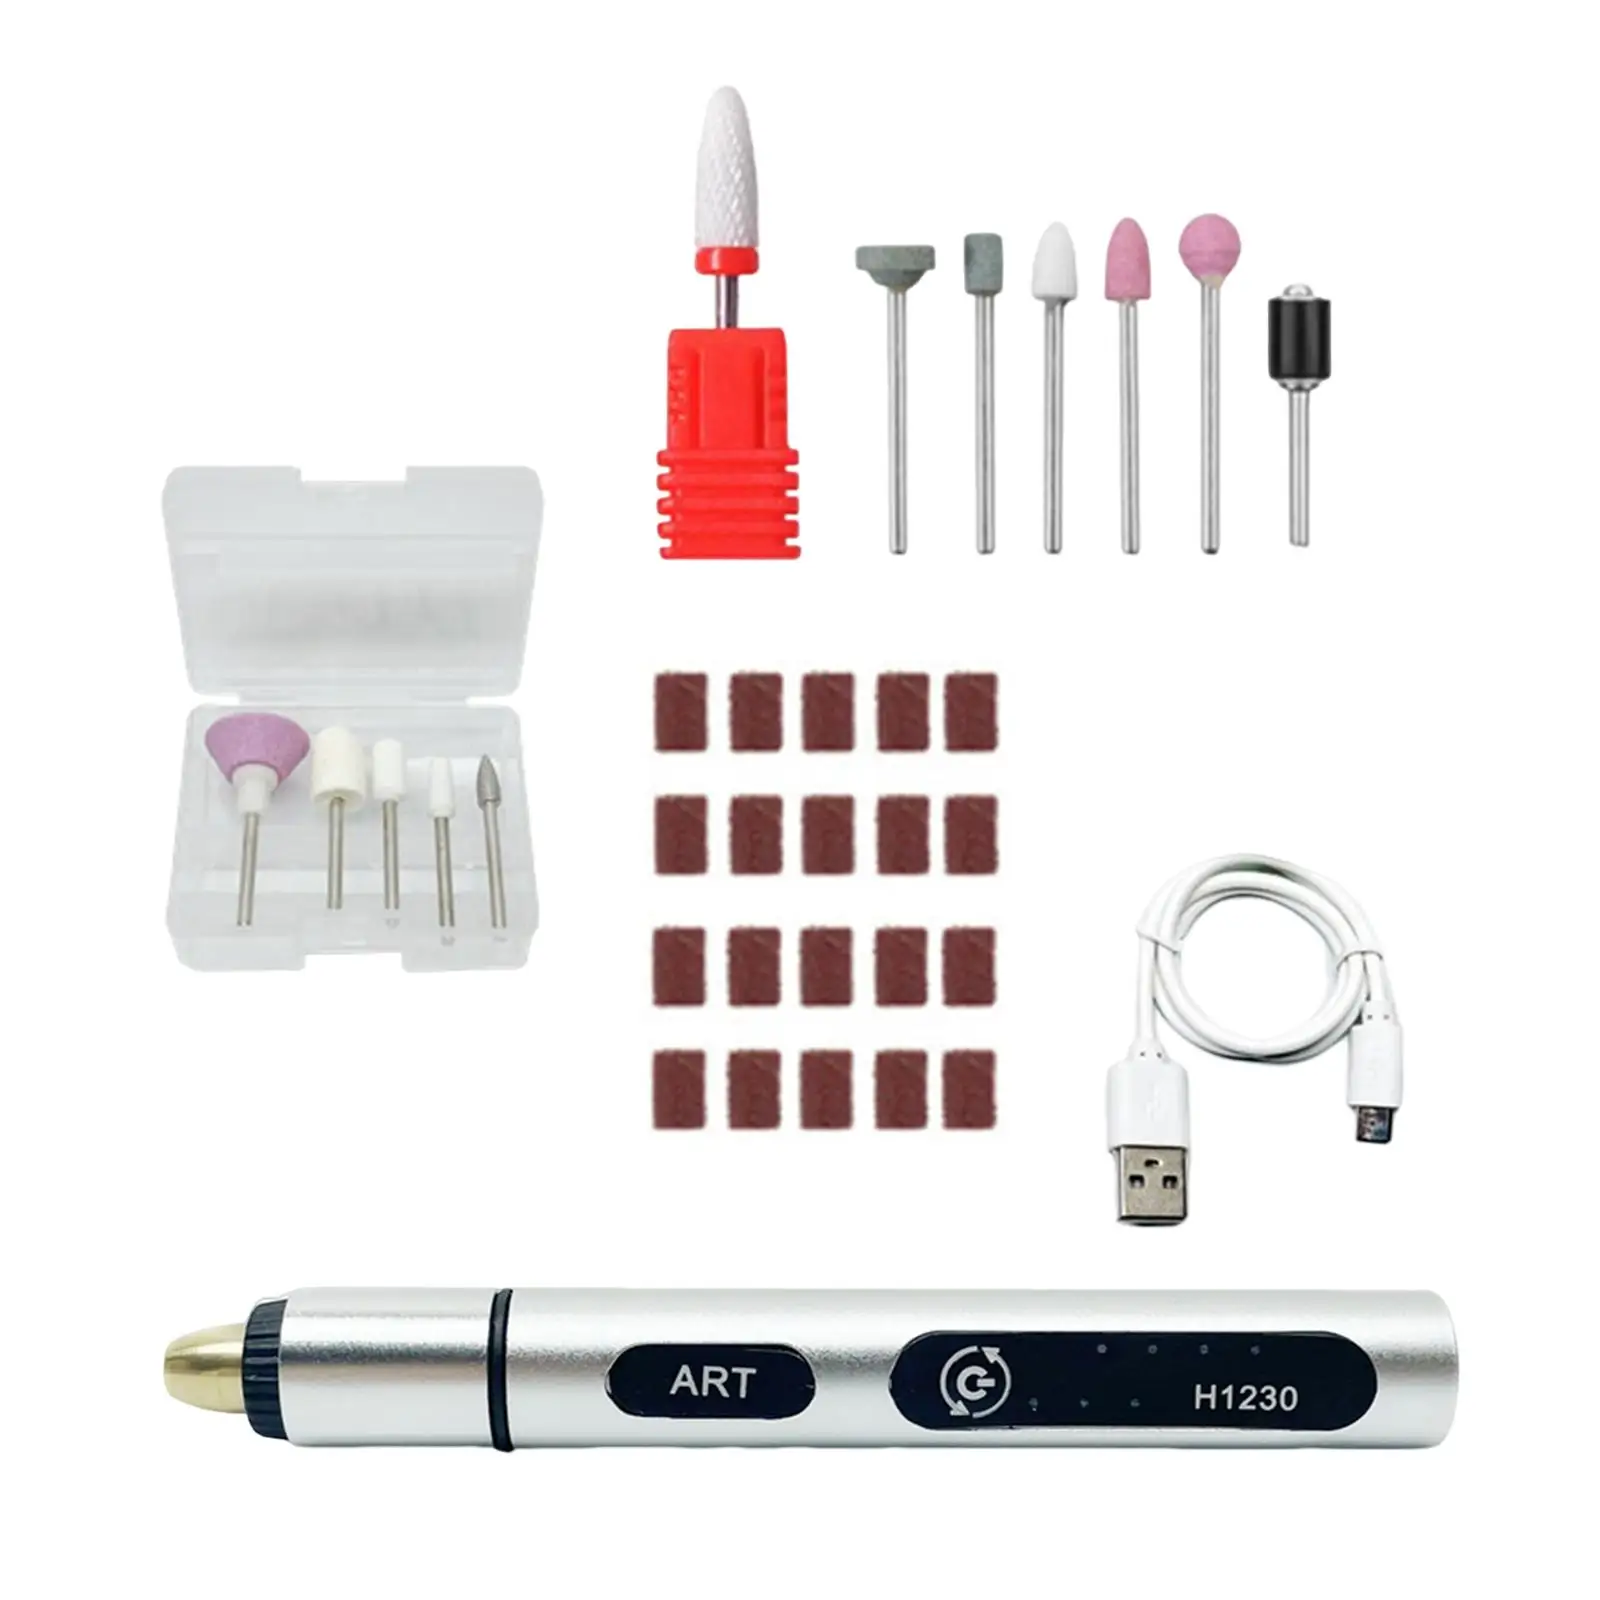 Electric Nail Drills Kit USB Charging Manicure Pedicure Pen Polisher Sander Micro Engraver Pen Accessories for Acrylic Ceramic